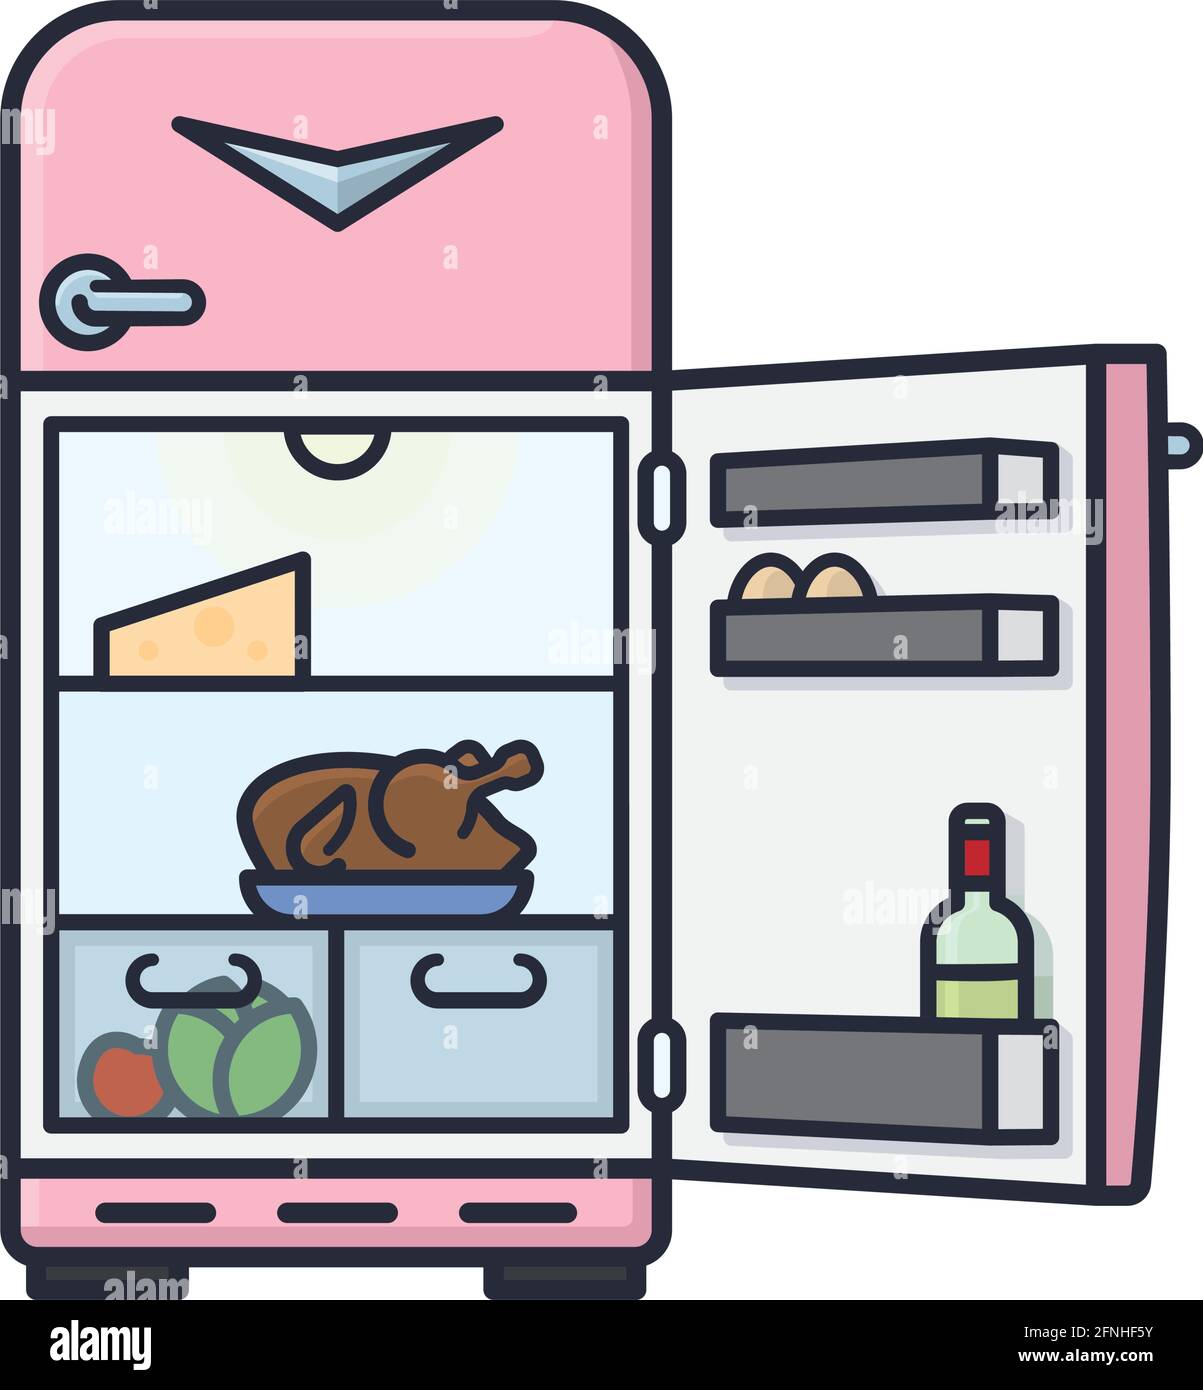 https://c8.alamy.com/comp/2FNHF5Y/open-retro-refrigerator-isolated-vector-illustration-for-throw-out-your-leftovers-day-on-november-29-2FNHF5Y.jpg